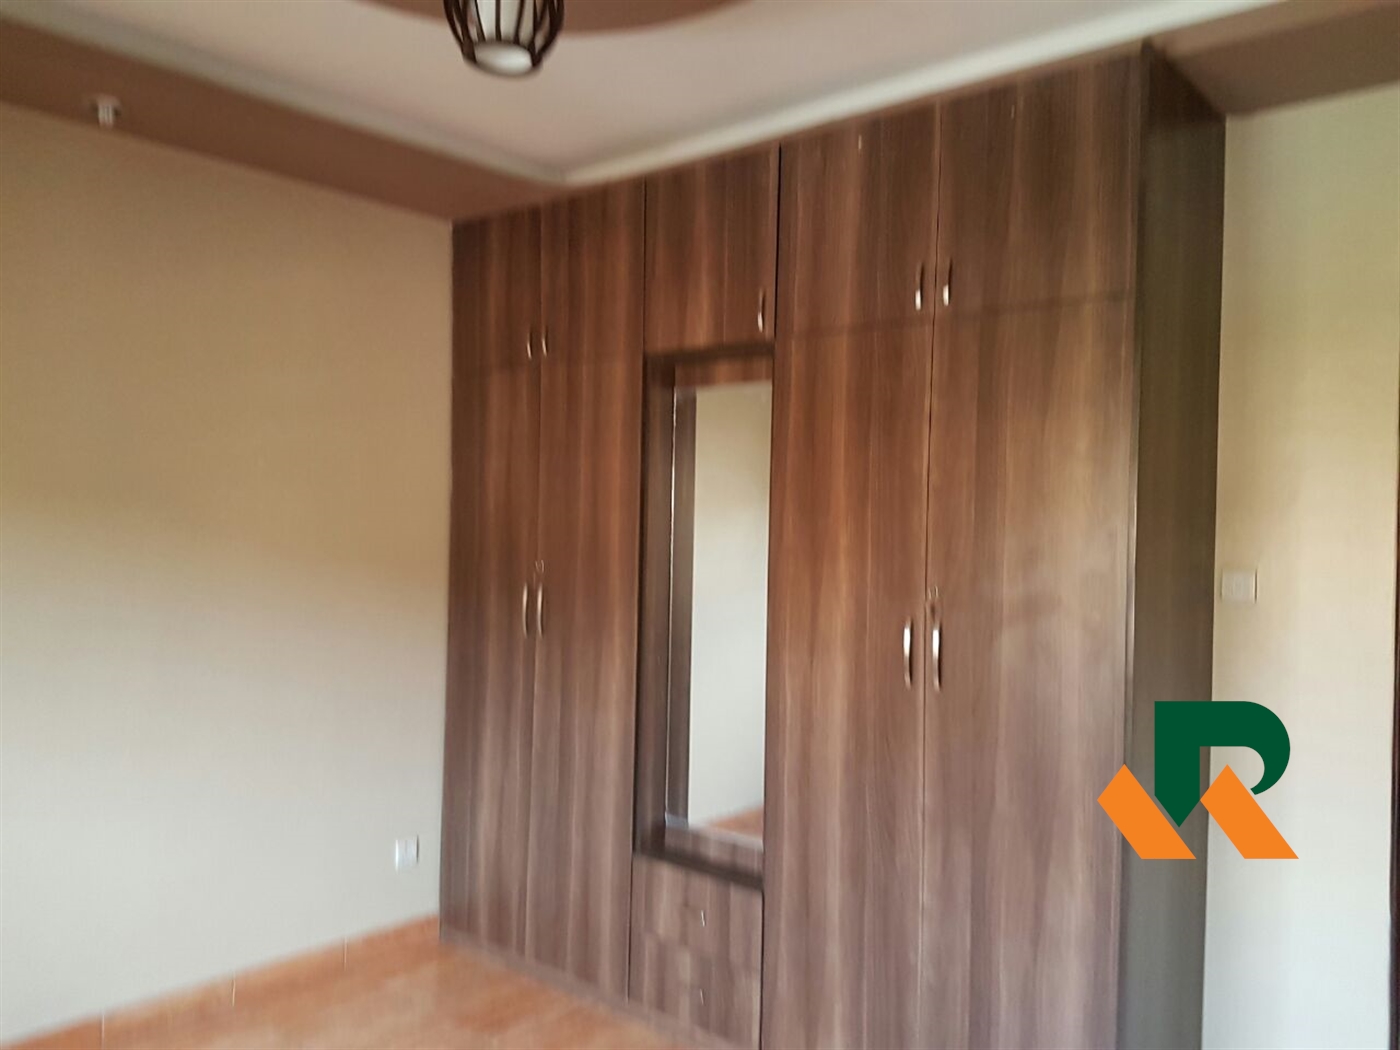 Town House for sale in Lugogo Kampala